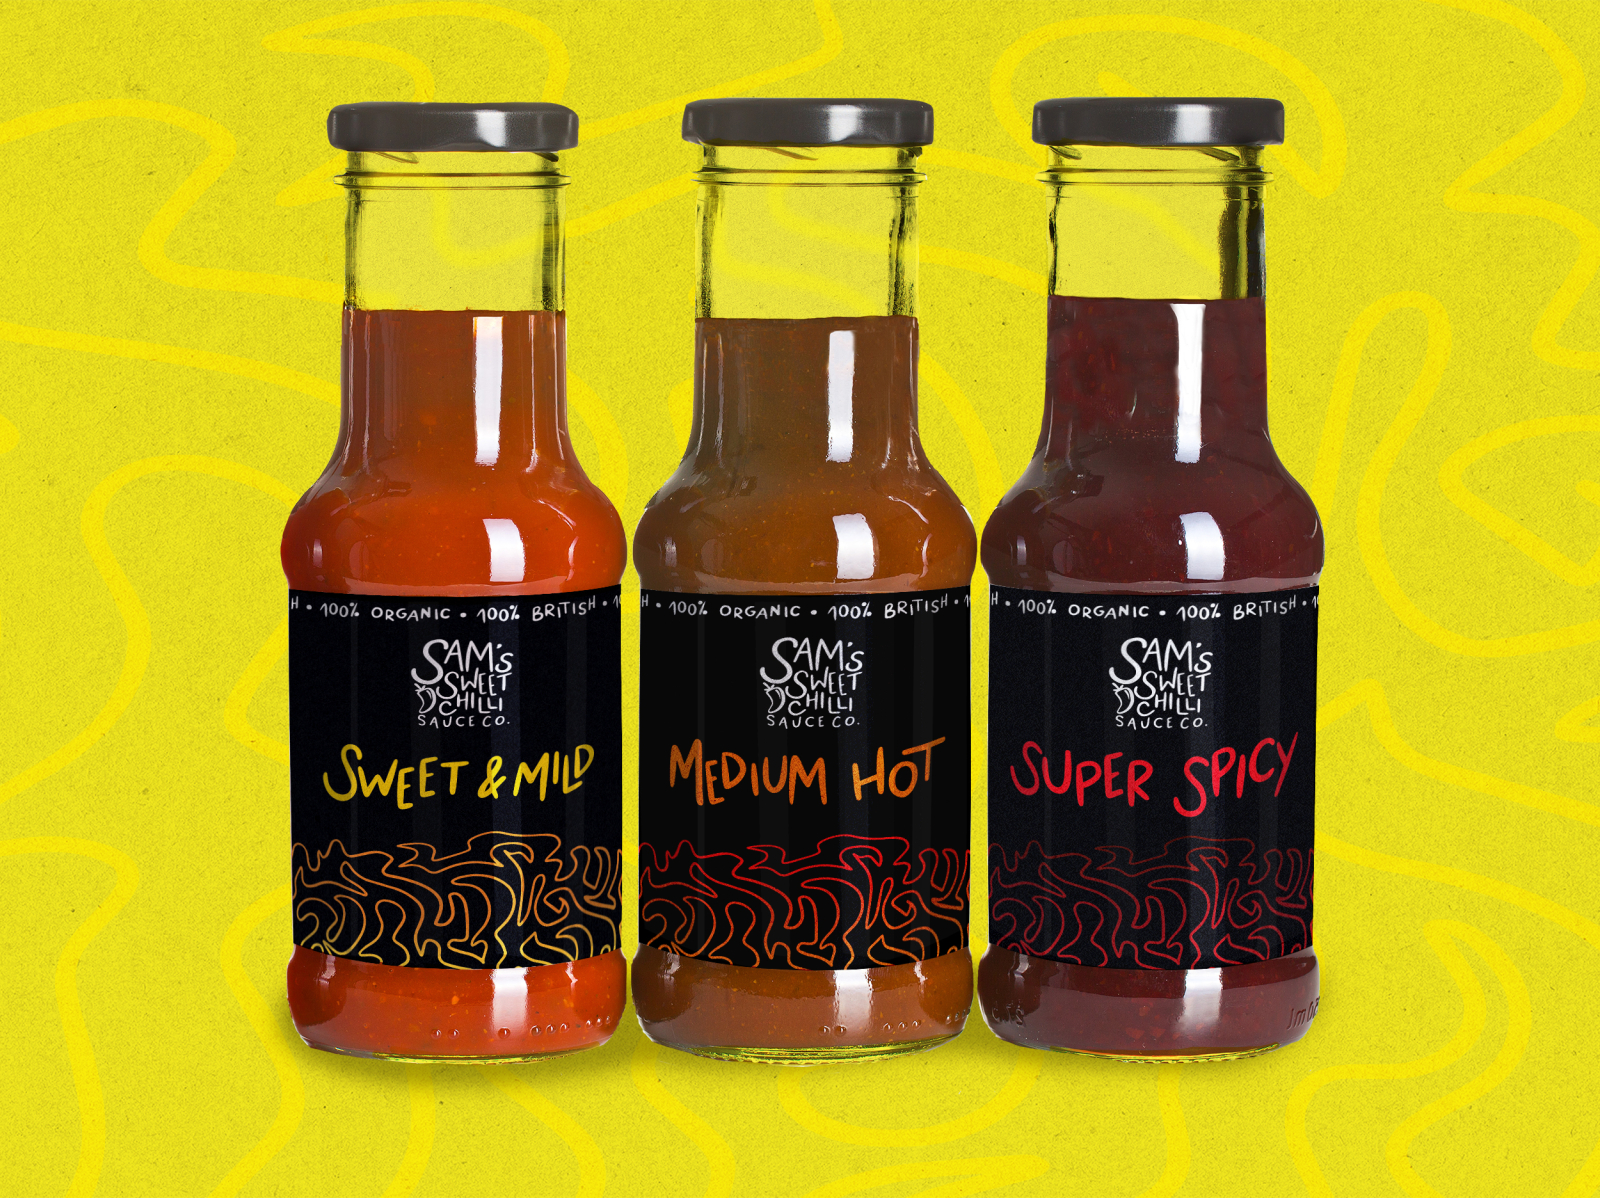 Download Hot sauce logo and label design by Brandi on Dribbble